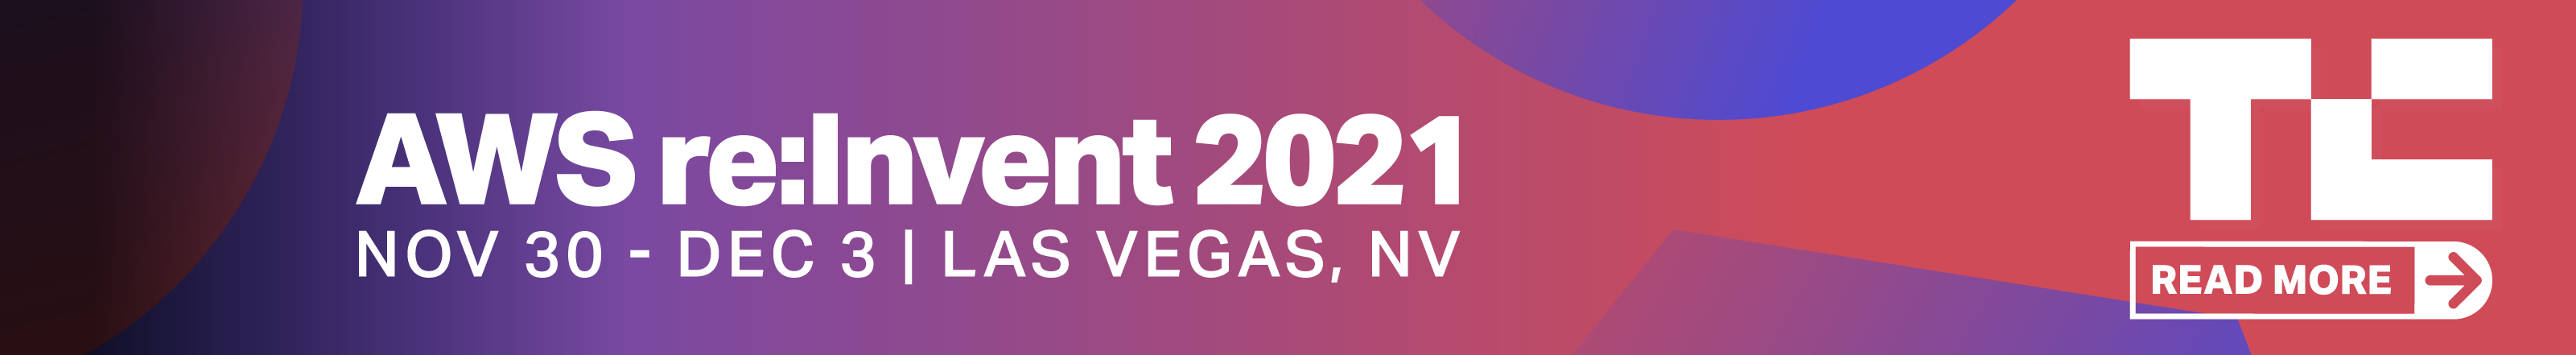 learn more about AWS re: Invent 2021 on TechCrunch